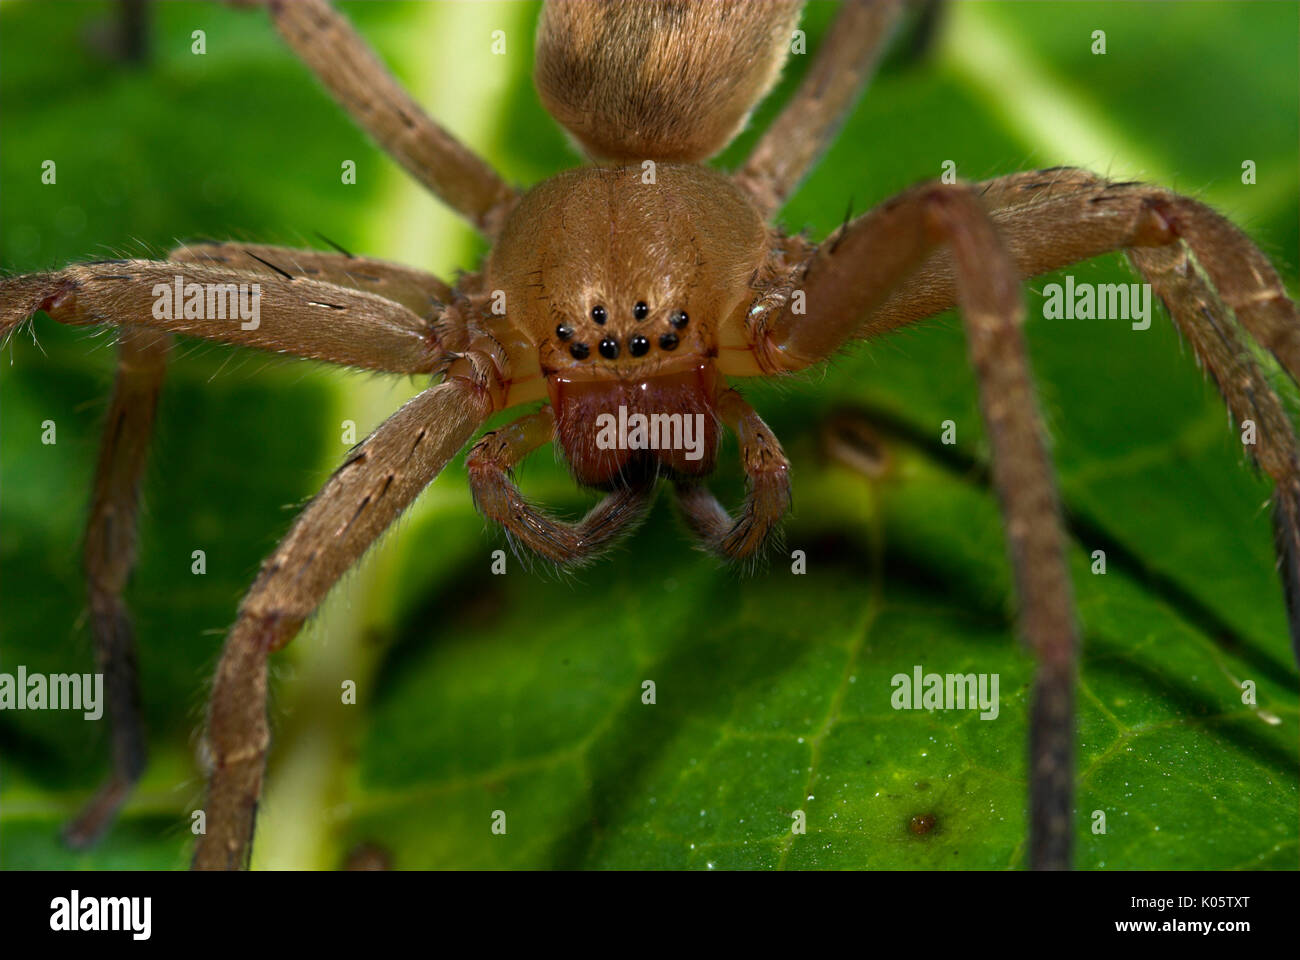 Hunting or Nursery Web Spider, Family Pisauridae, Manu Peru, close uup of face showing eight eyes, jungle, amazon, 8, fearsome Stock Photo